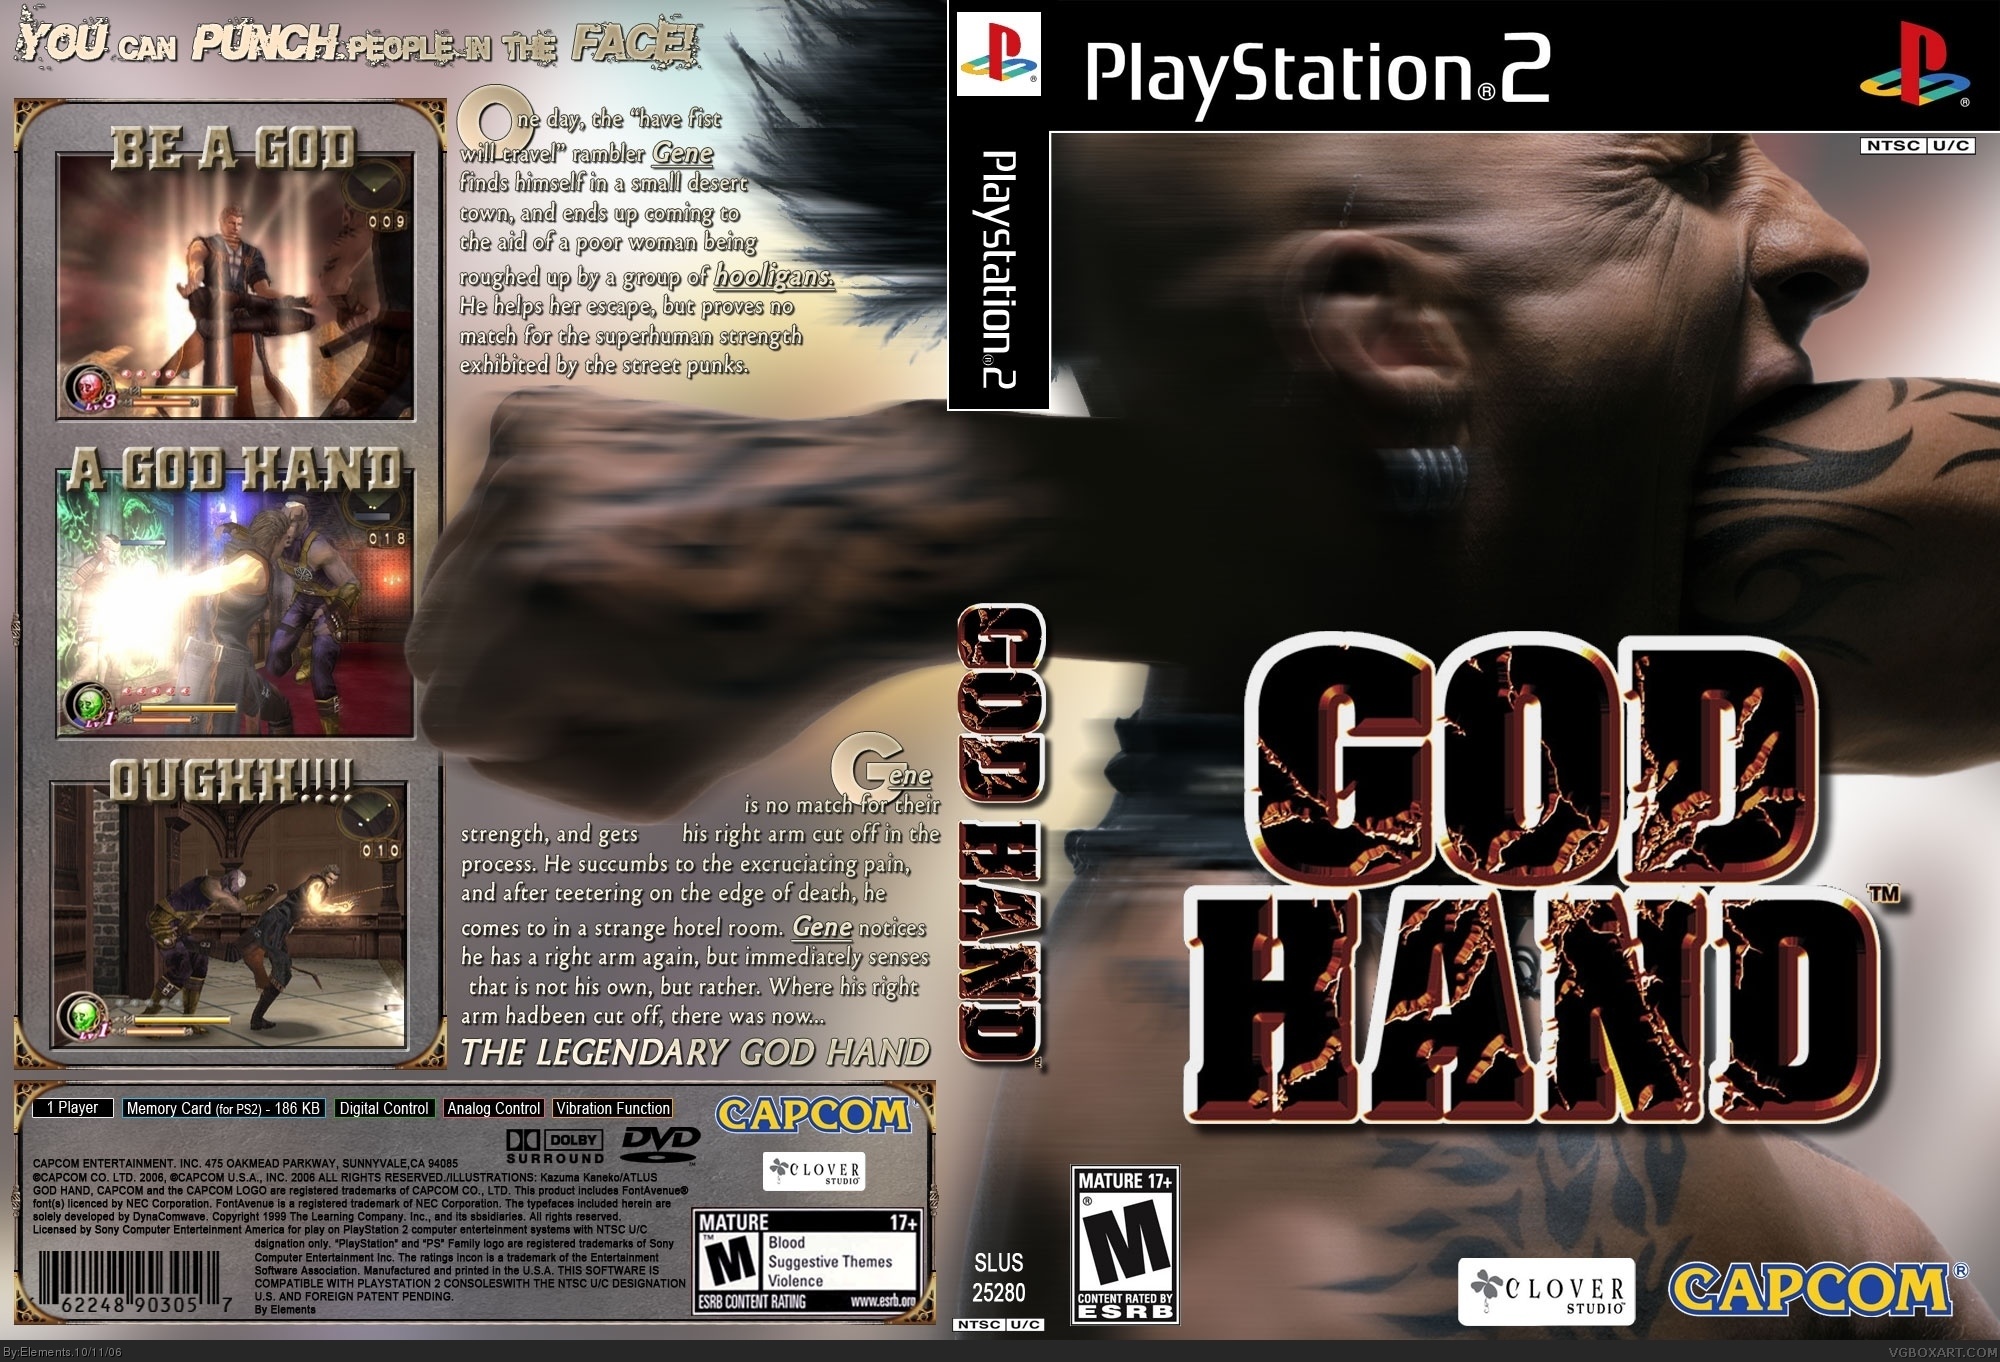 god hand game for pc download